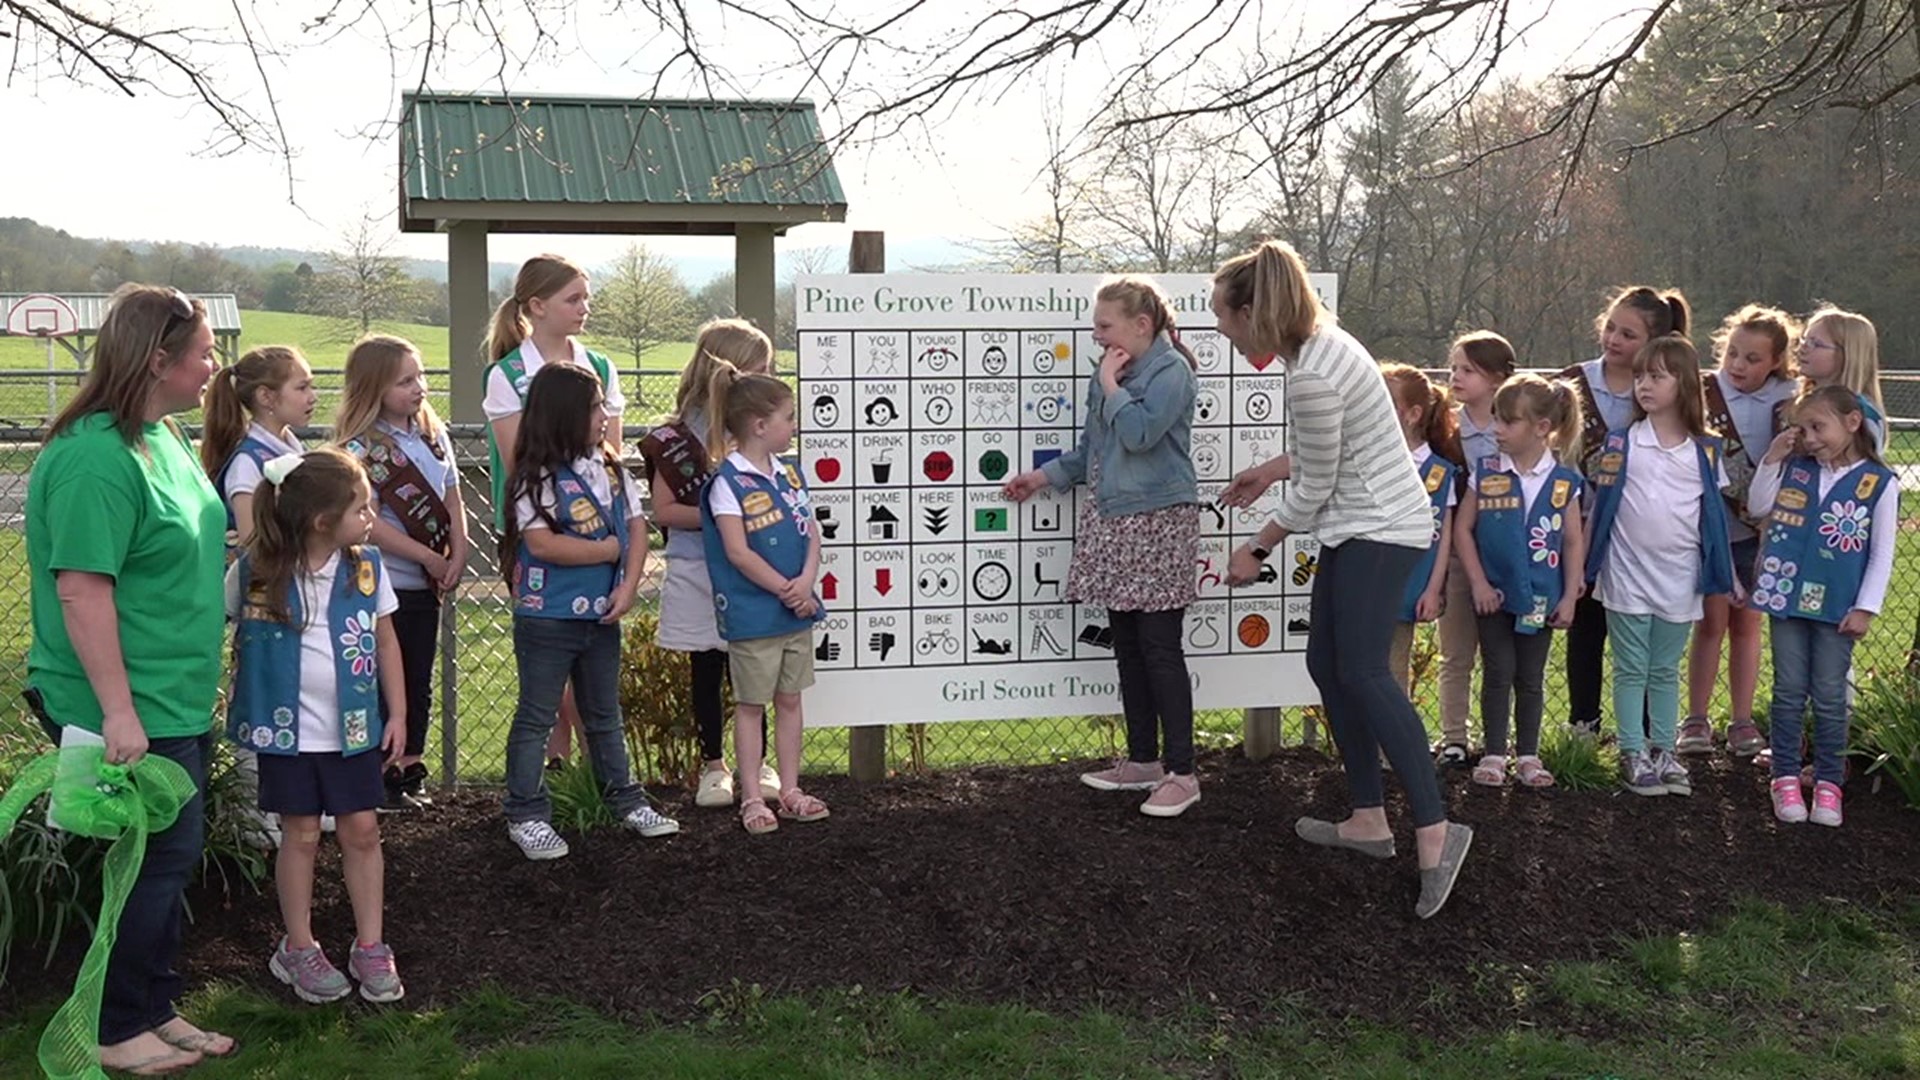 Newswatch 16's Claire Alfree shows us how a Girl Scout troop is making Schuylkill County more inclusive, starting on the playground.